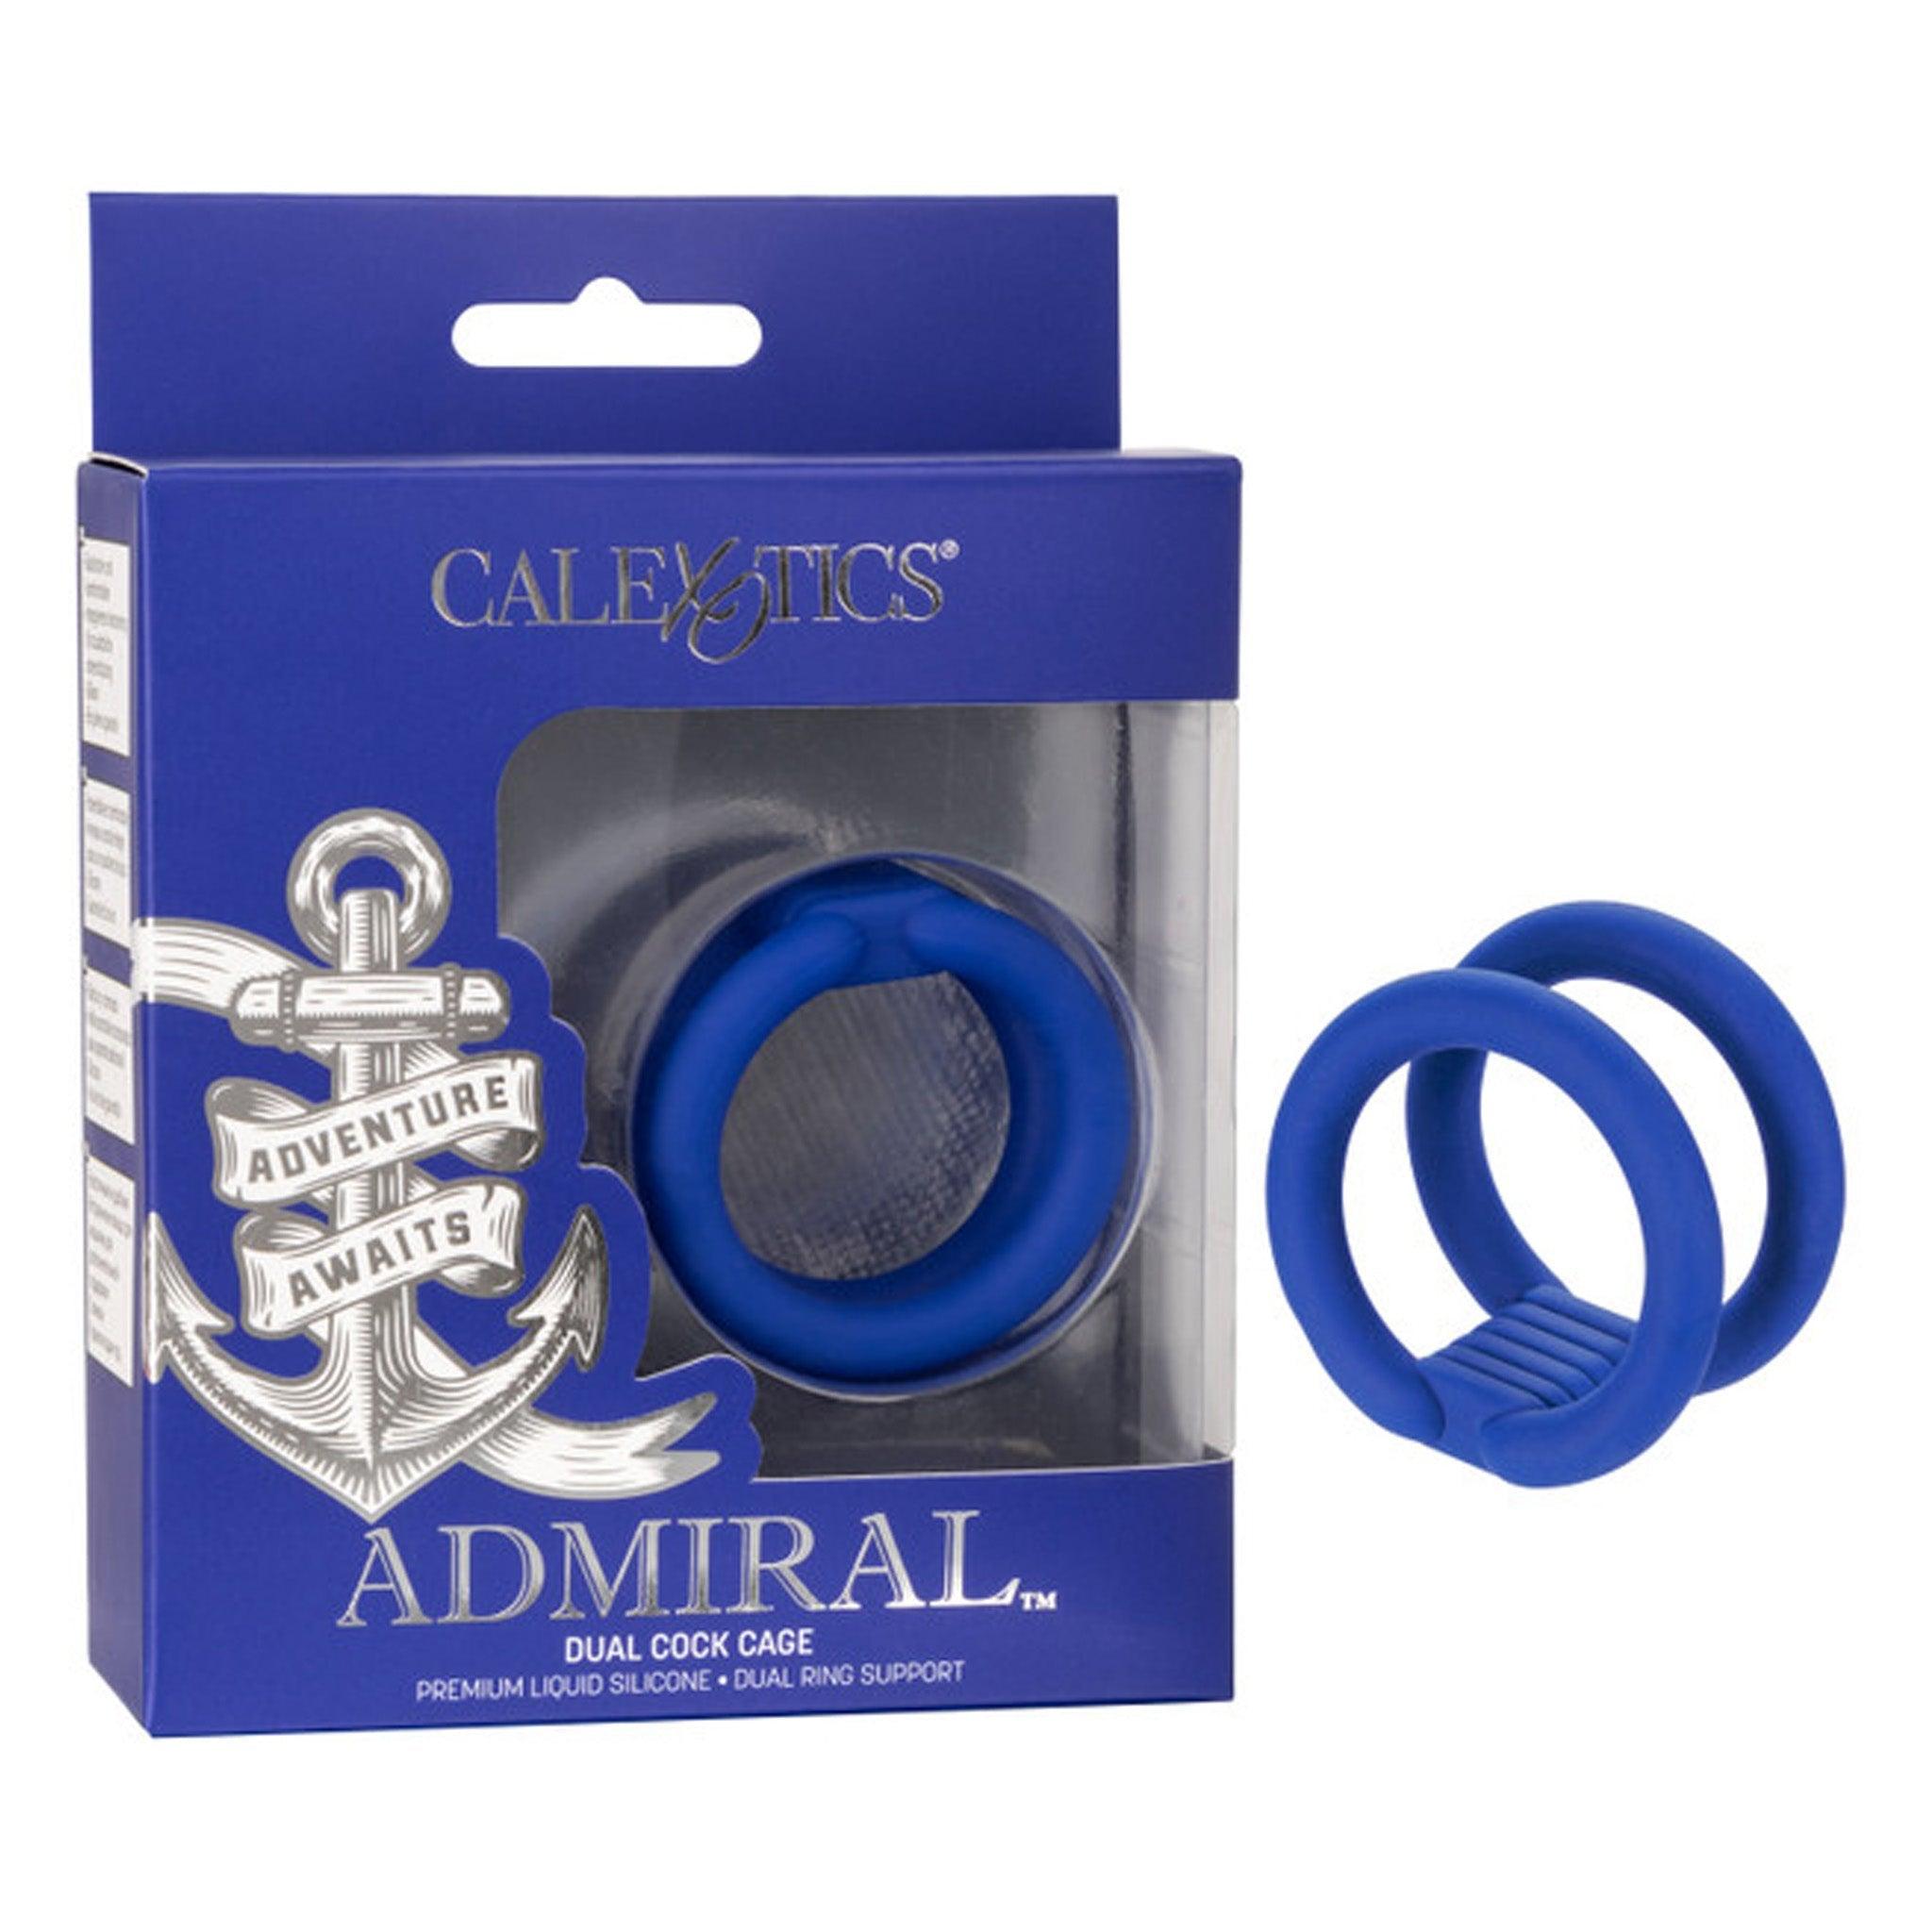 Admiral Dual Cock Cage - CheapLubes.com